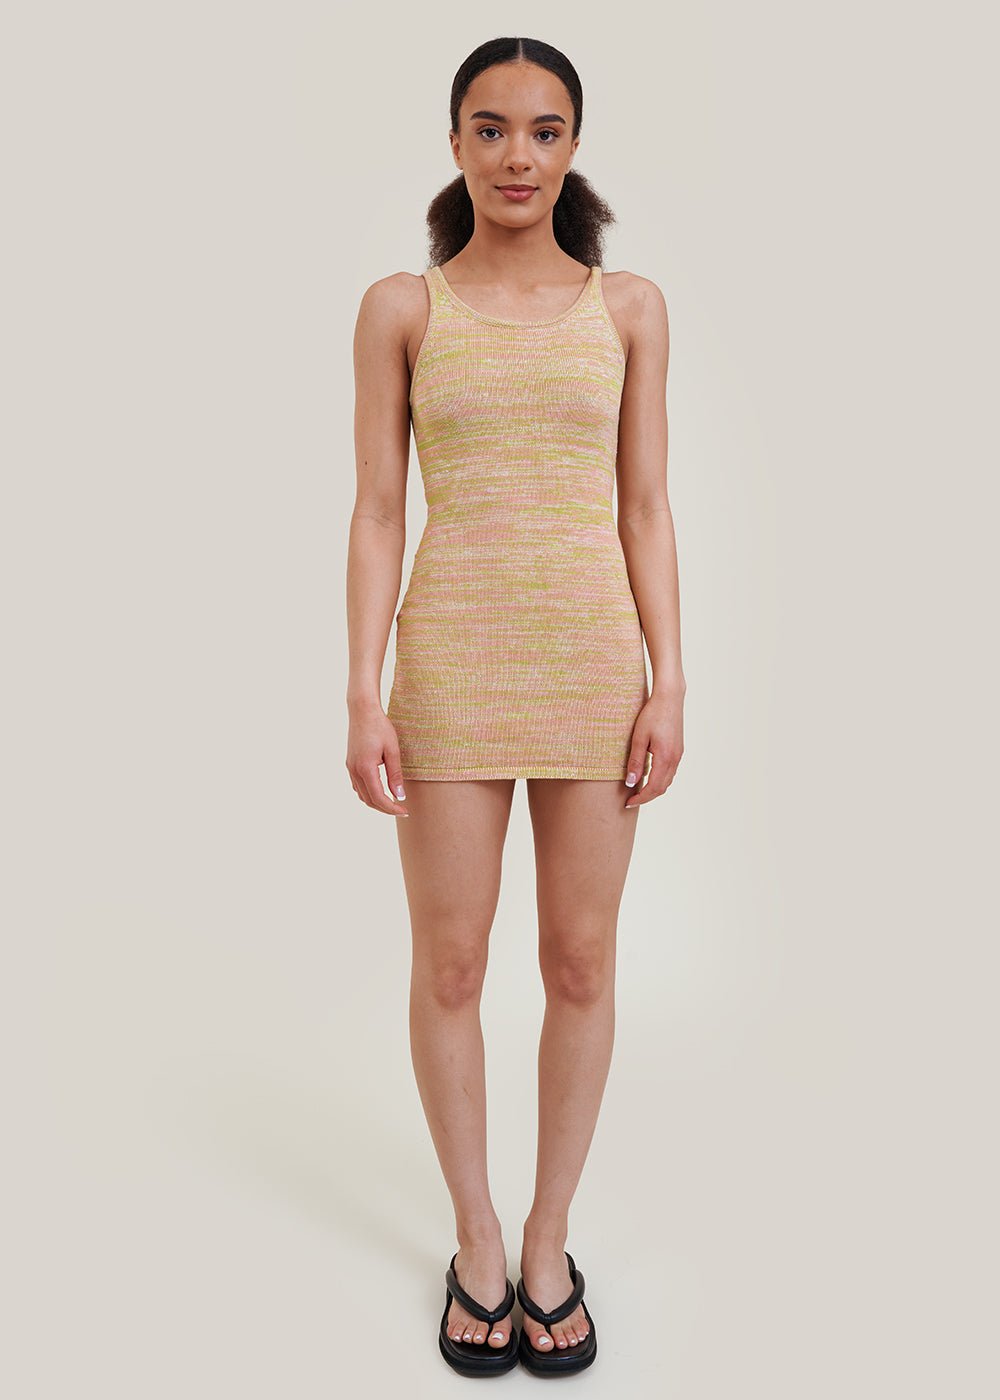 Belle The Label Pear Knit Razor Dress - New Classics Studios Sustainable Ethical Fashion Canada